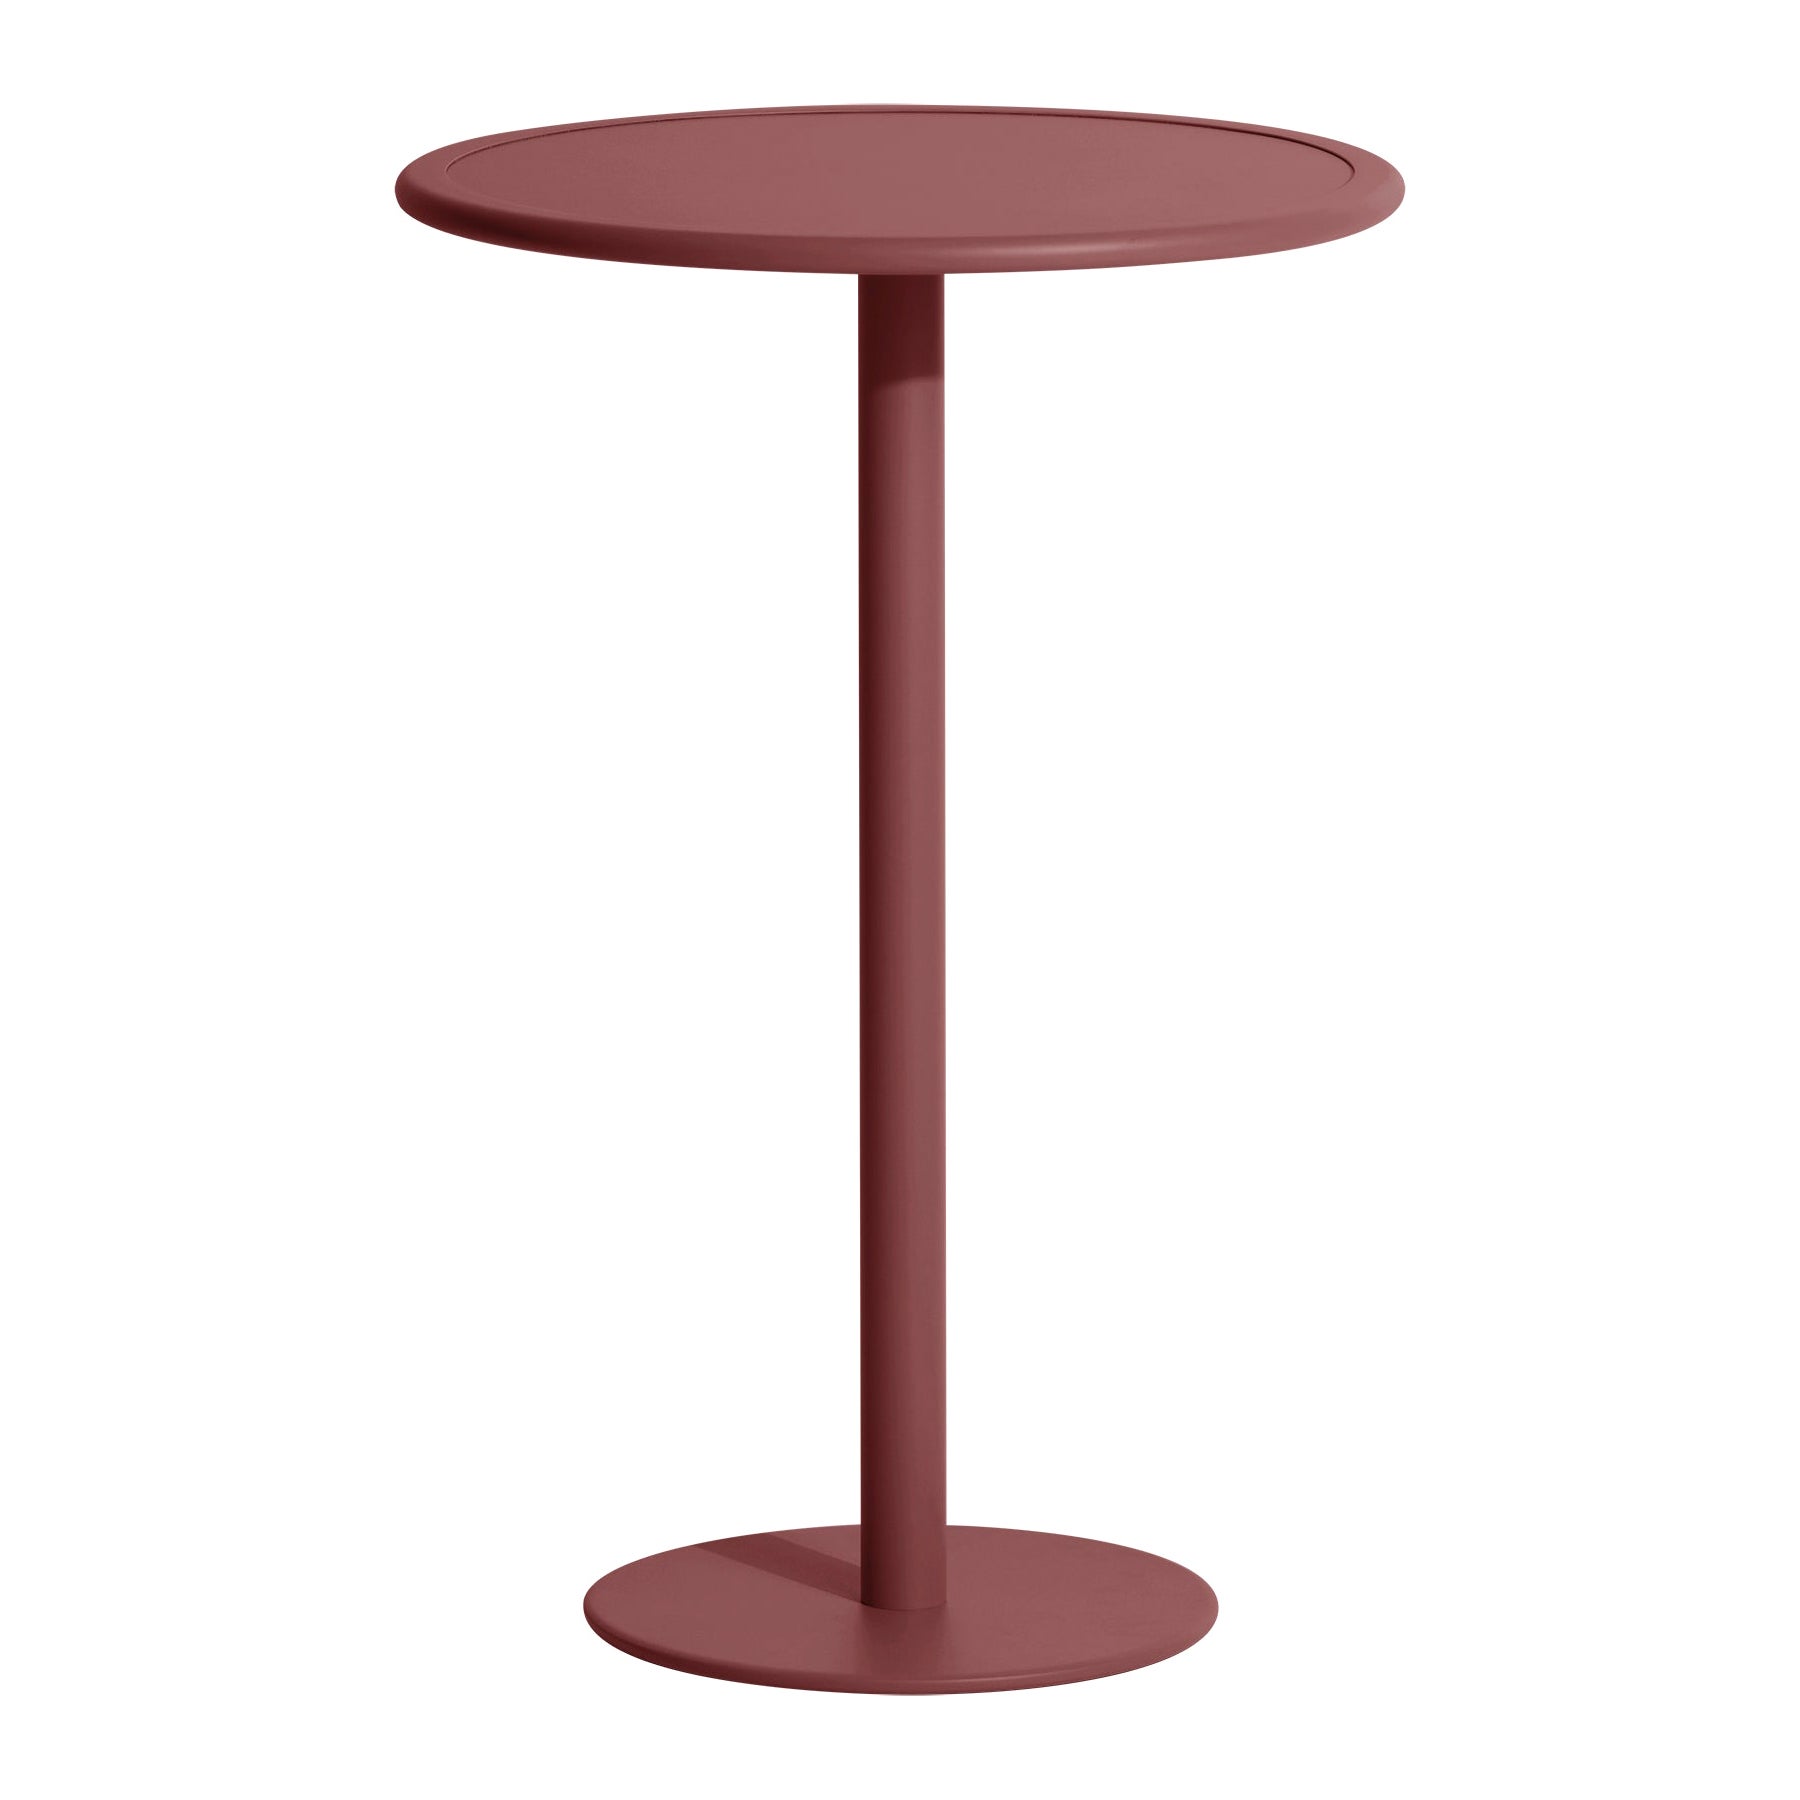 Petite Friture Week-End Round High Table in Burgundy Aluminium, 2017 For Sale